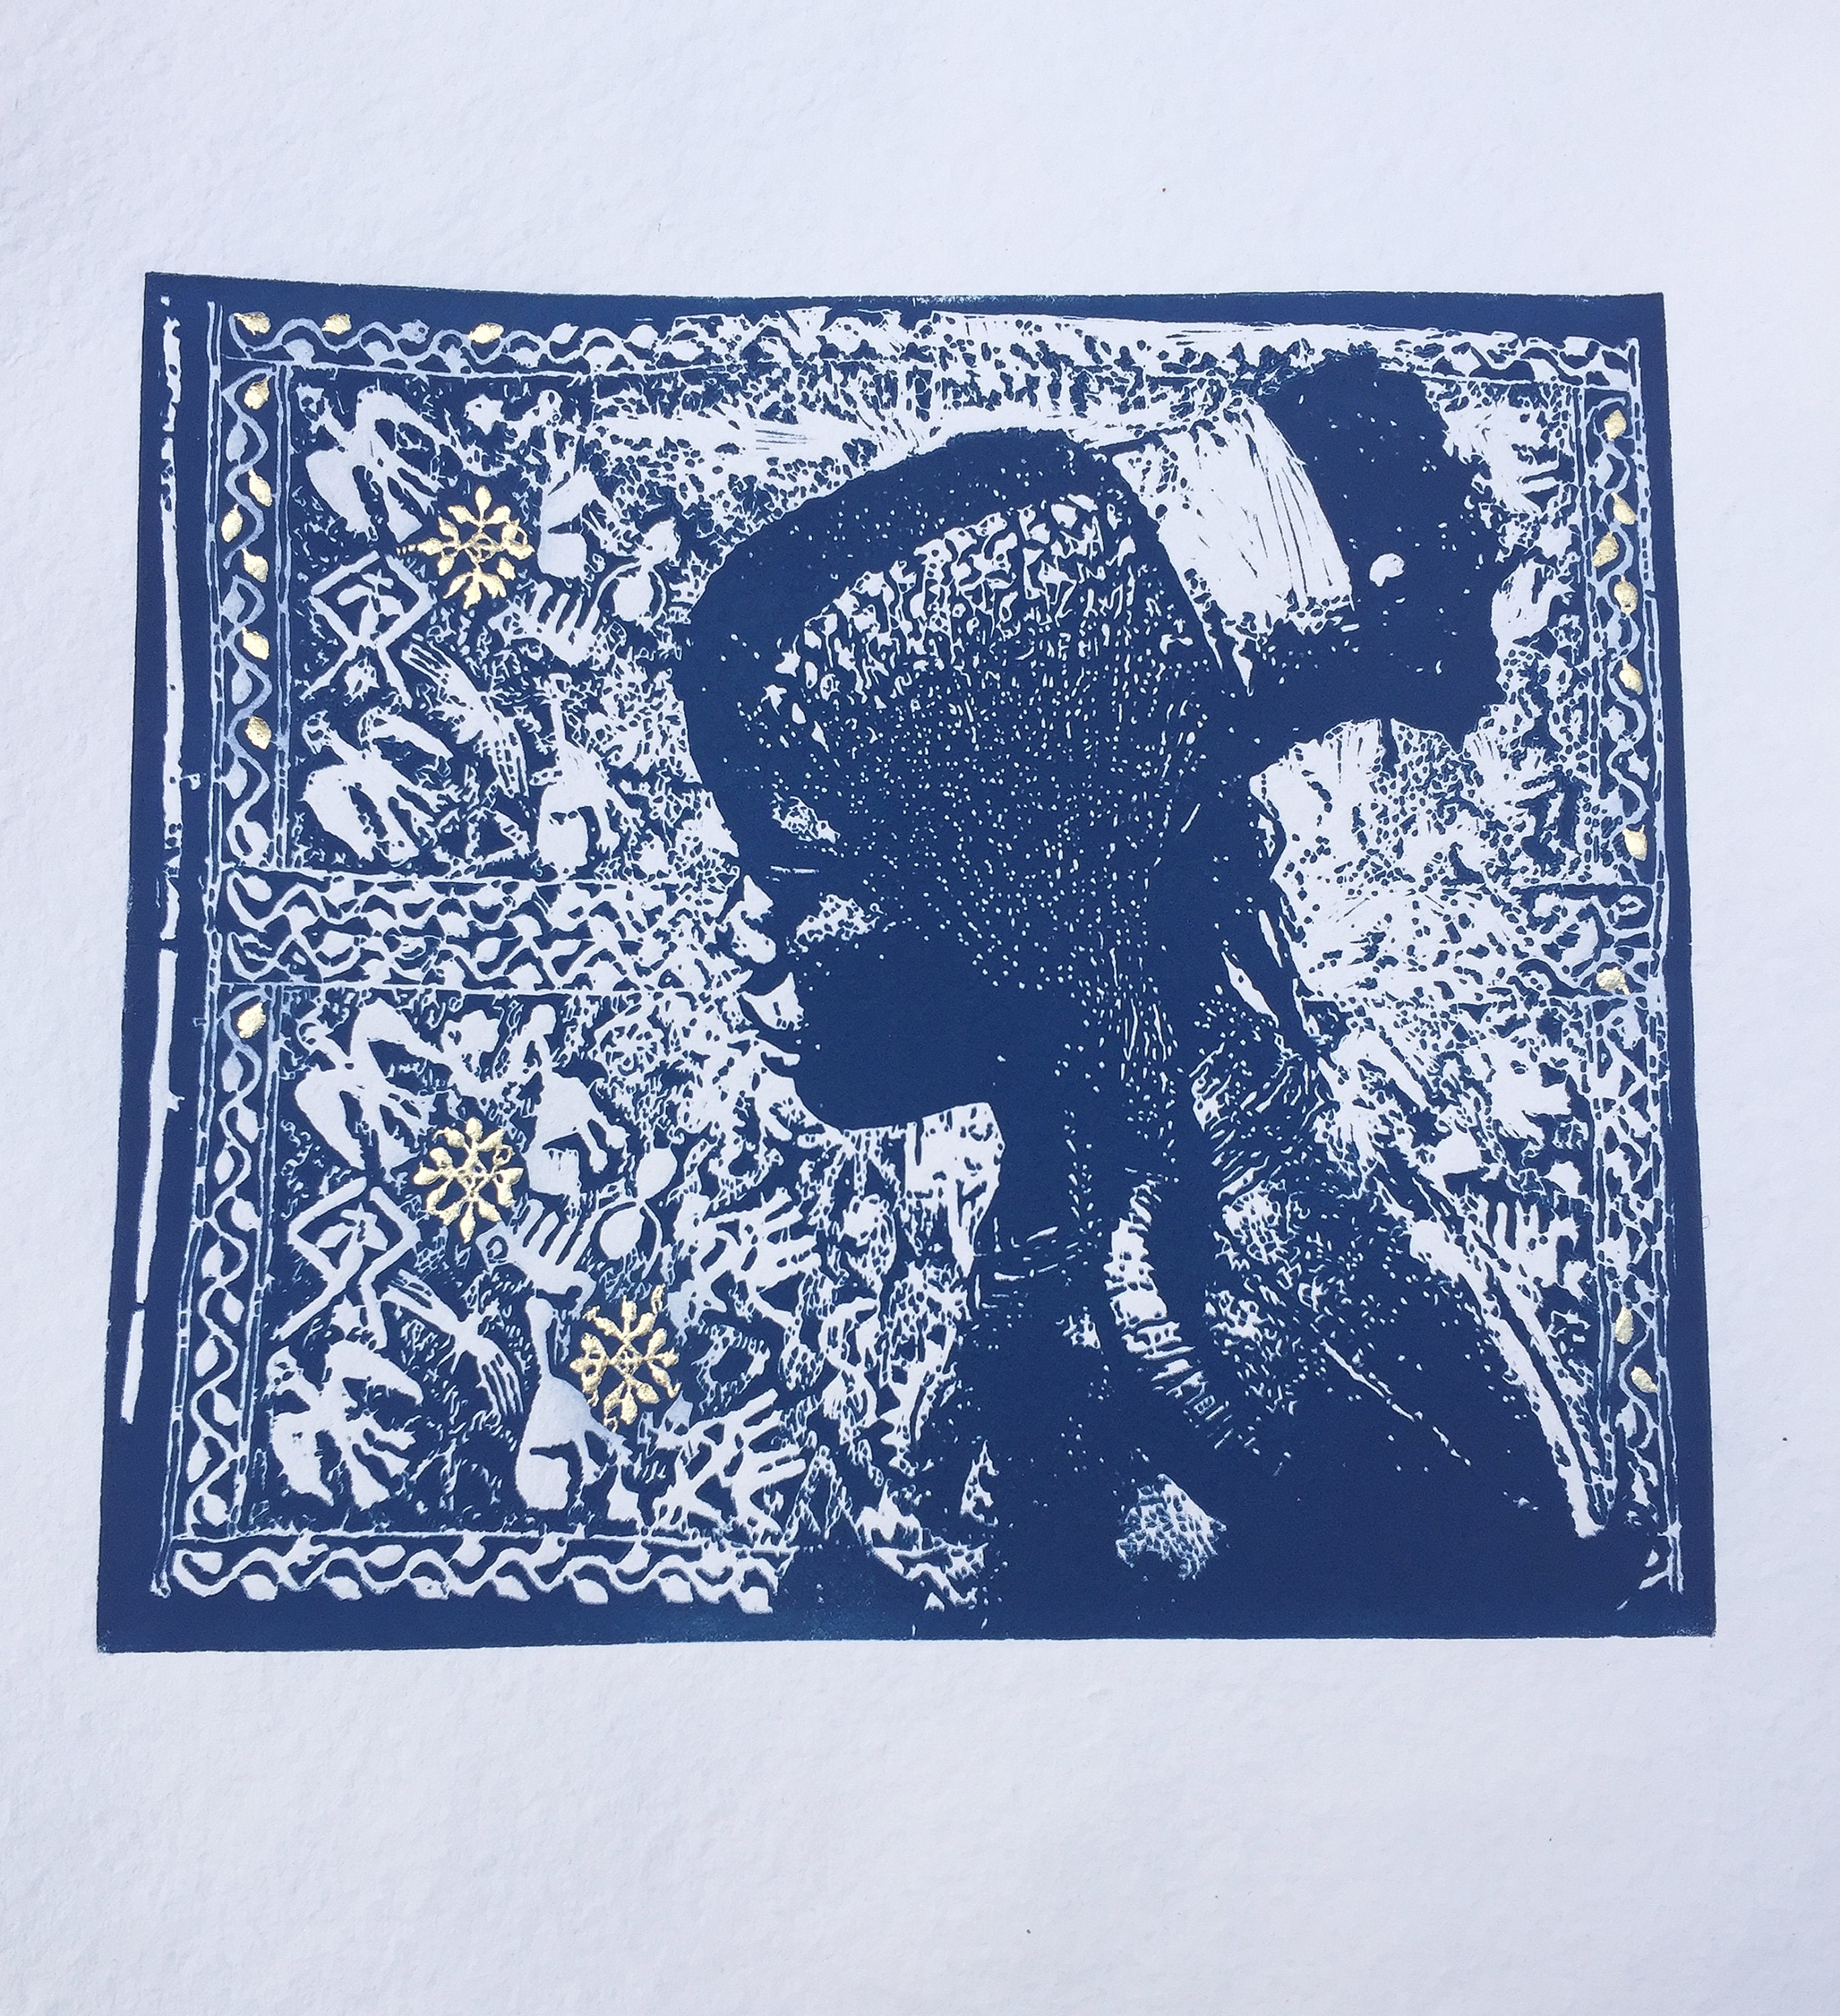 with gold leaf detail Ovambo Woman 420x600mm 0riginal lino print poster on handmade decal edged paper